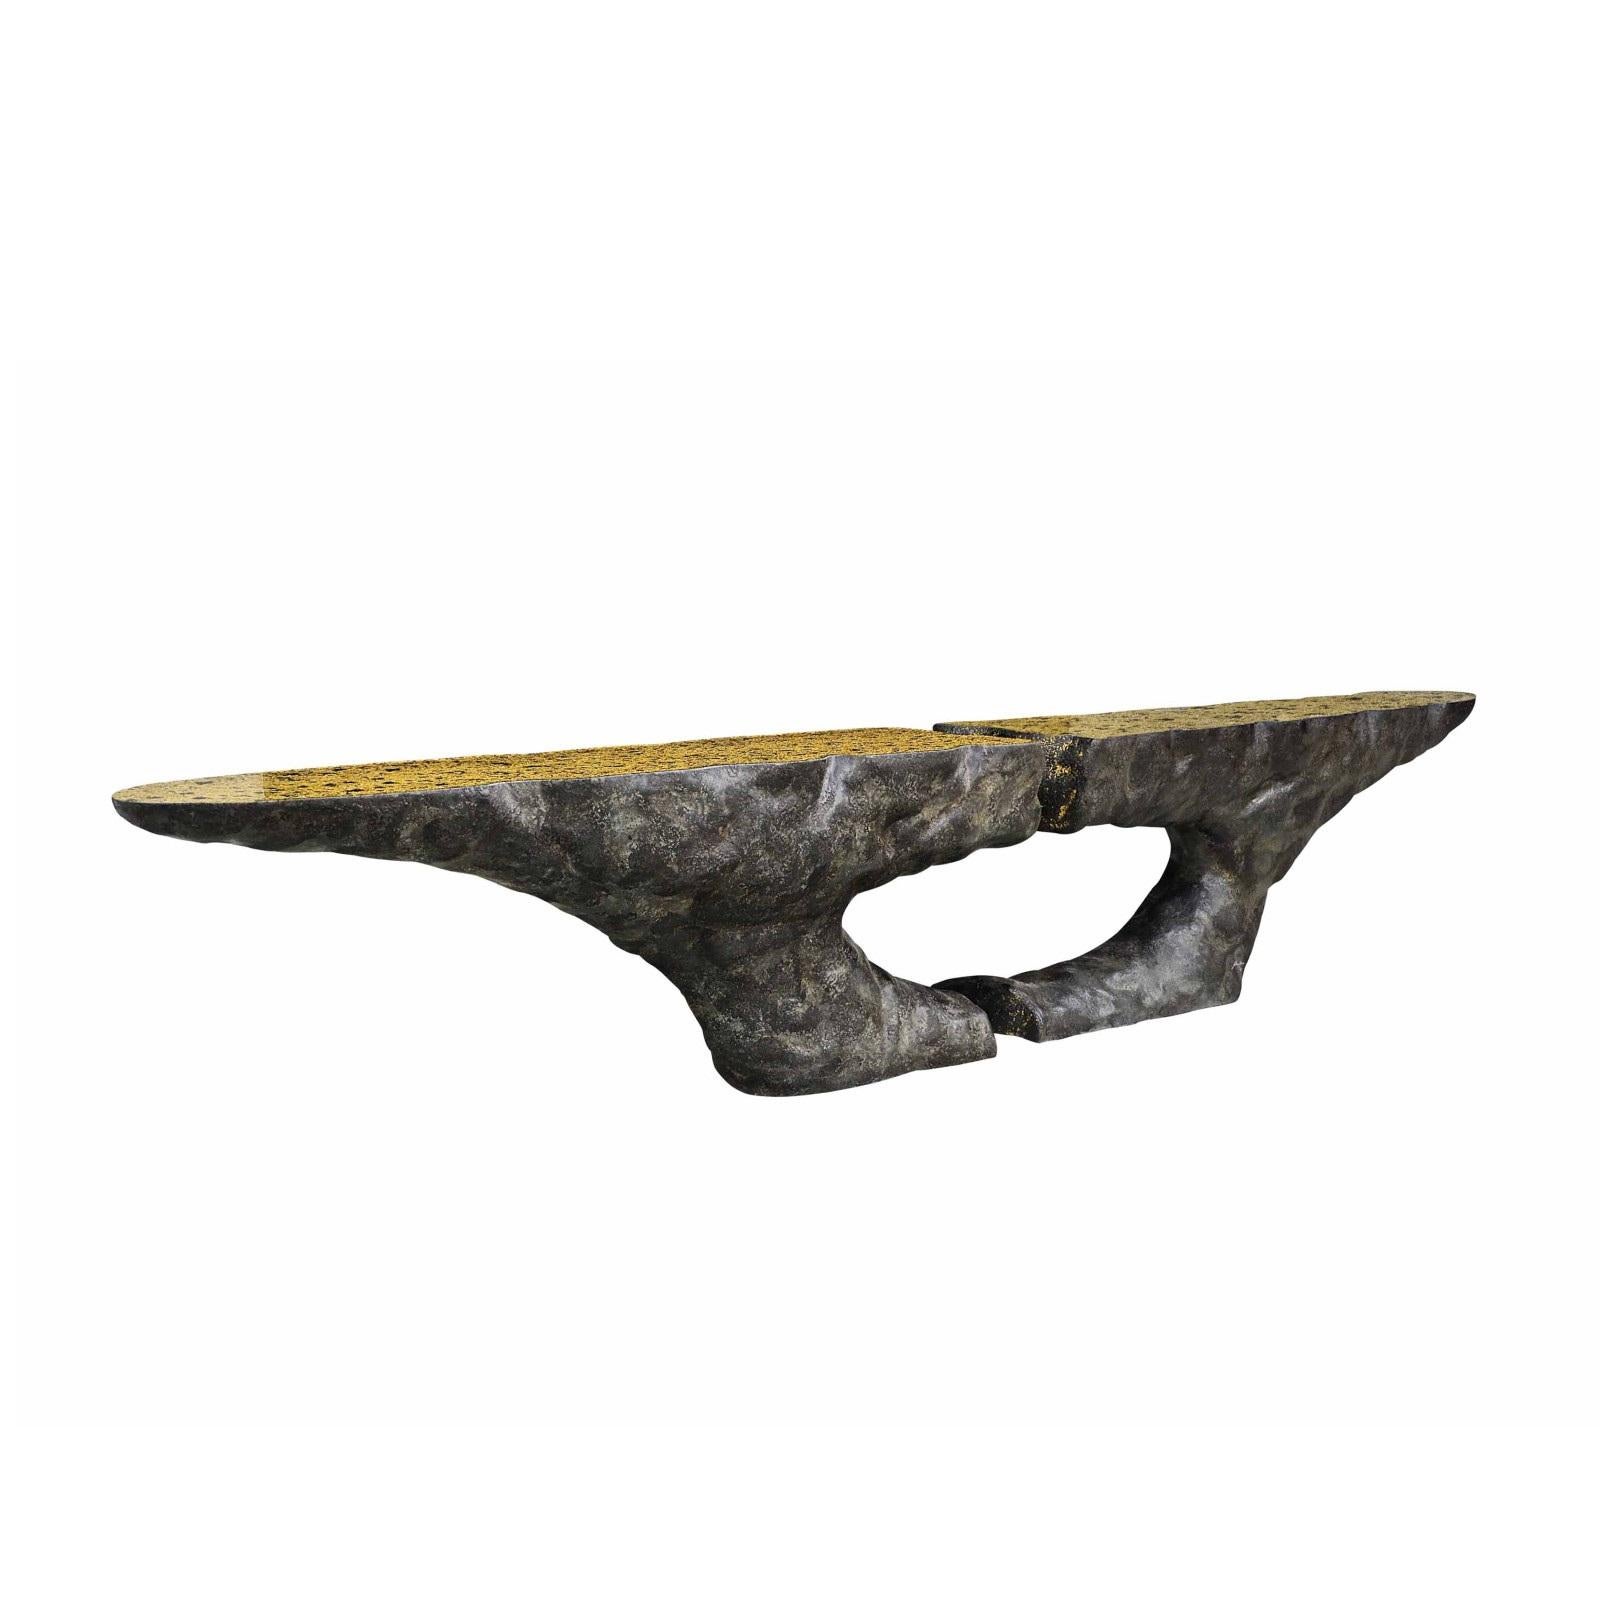 This console has a volcanic finish that gives it a natural and raw beauty, displaying textures inspired by volcanic formations in nature. The top of the console is textured gold leaf, bringing a touch of luxury and elegance to its overall